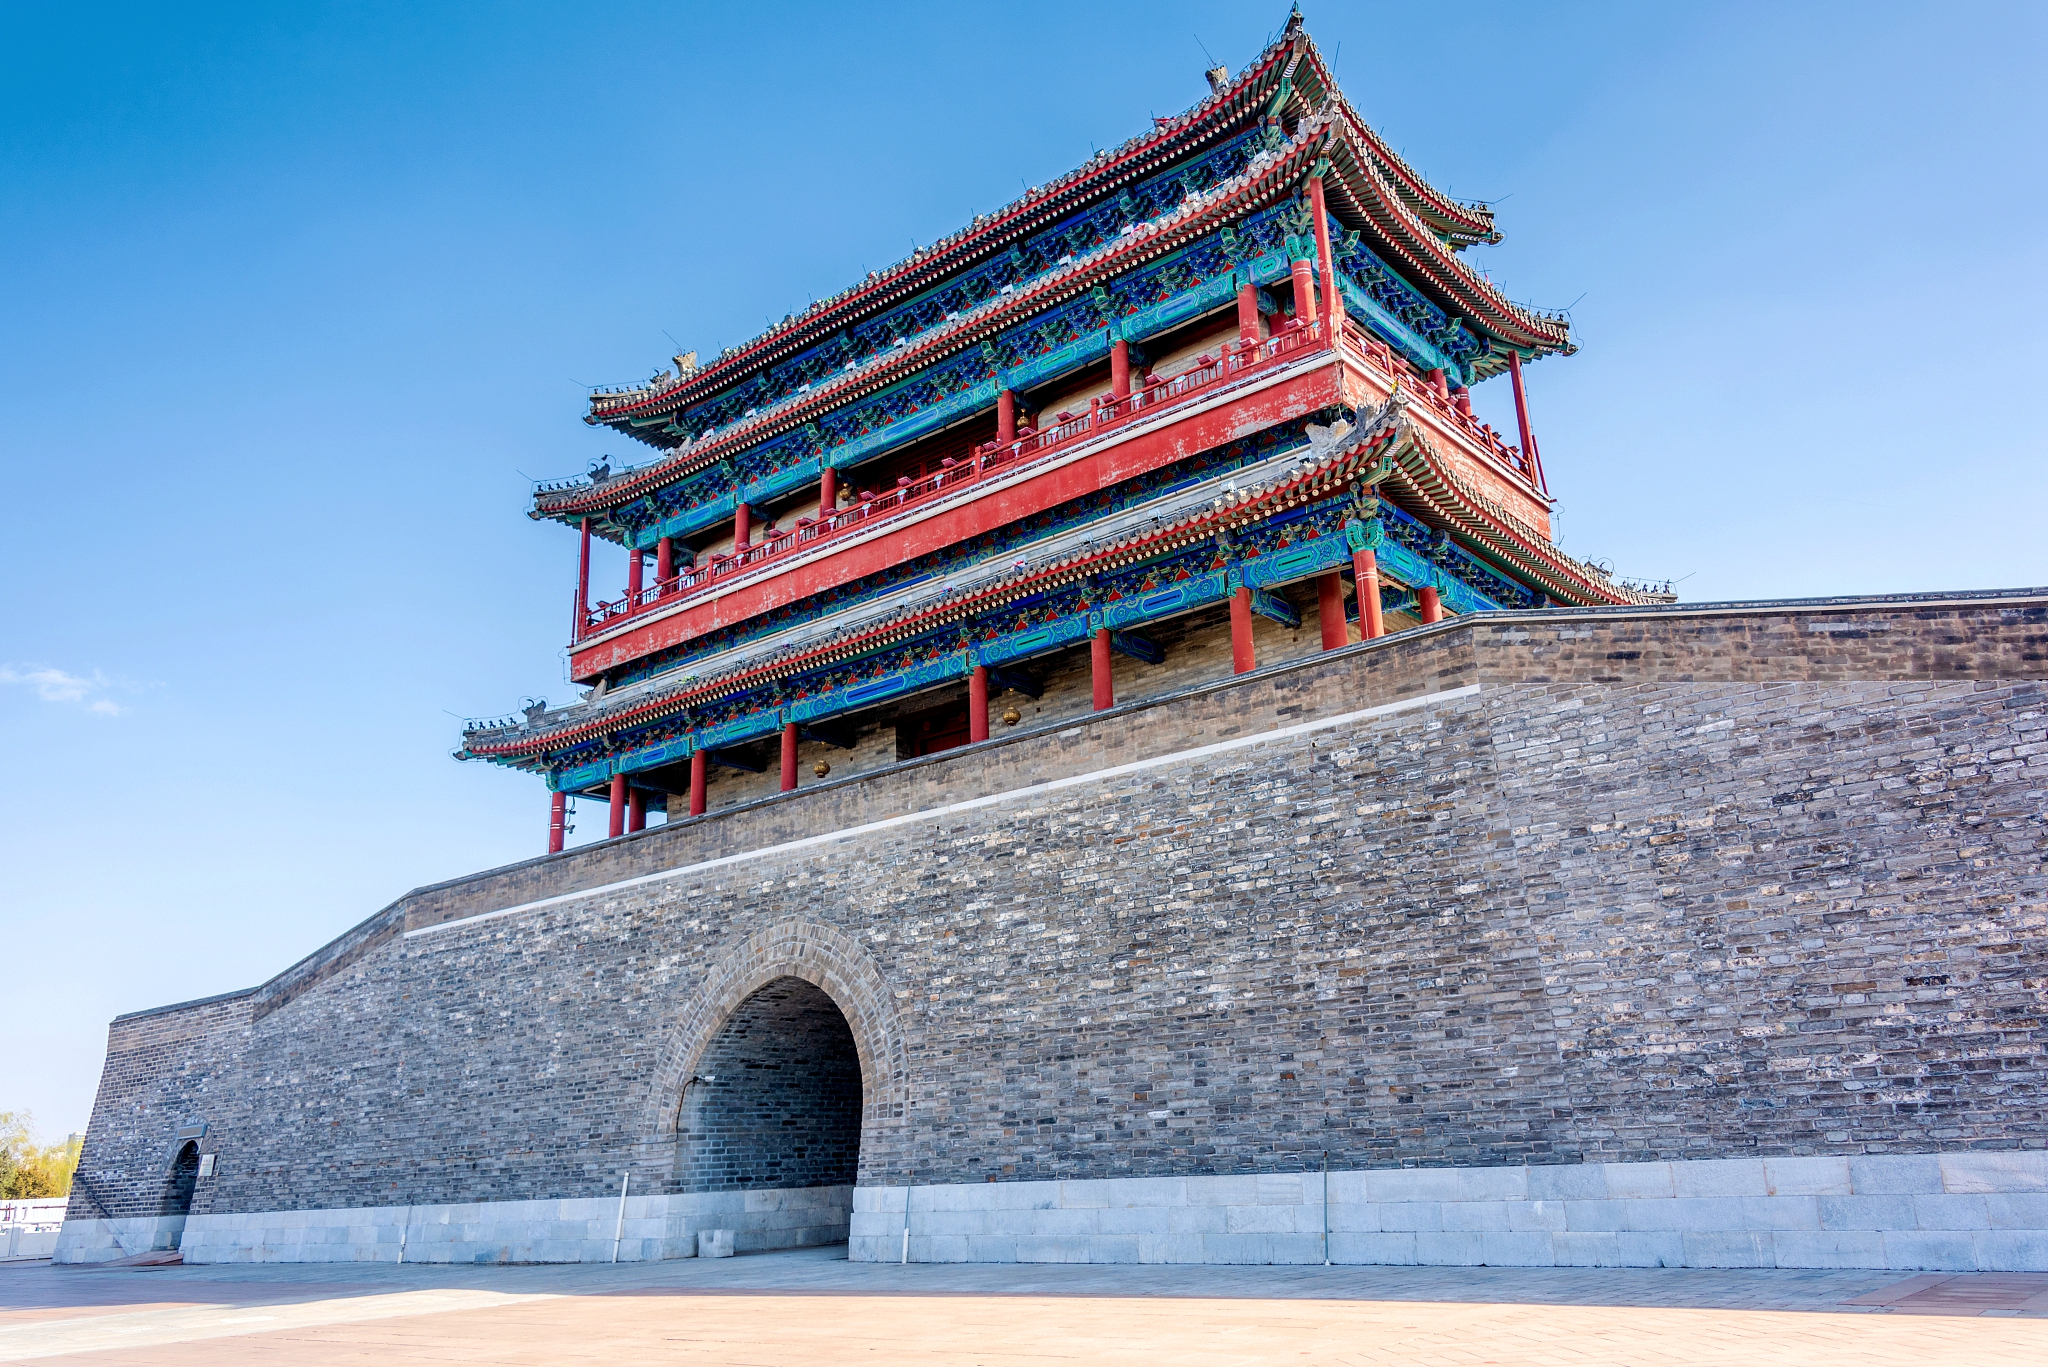 A file photo shows Yongding Gate, situated in the south of the Beijing Central Axis. /CFP